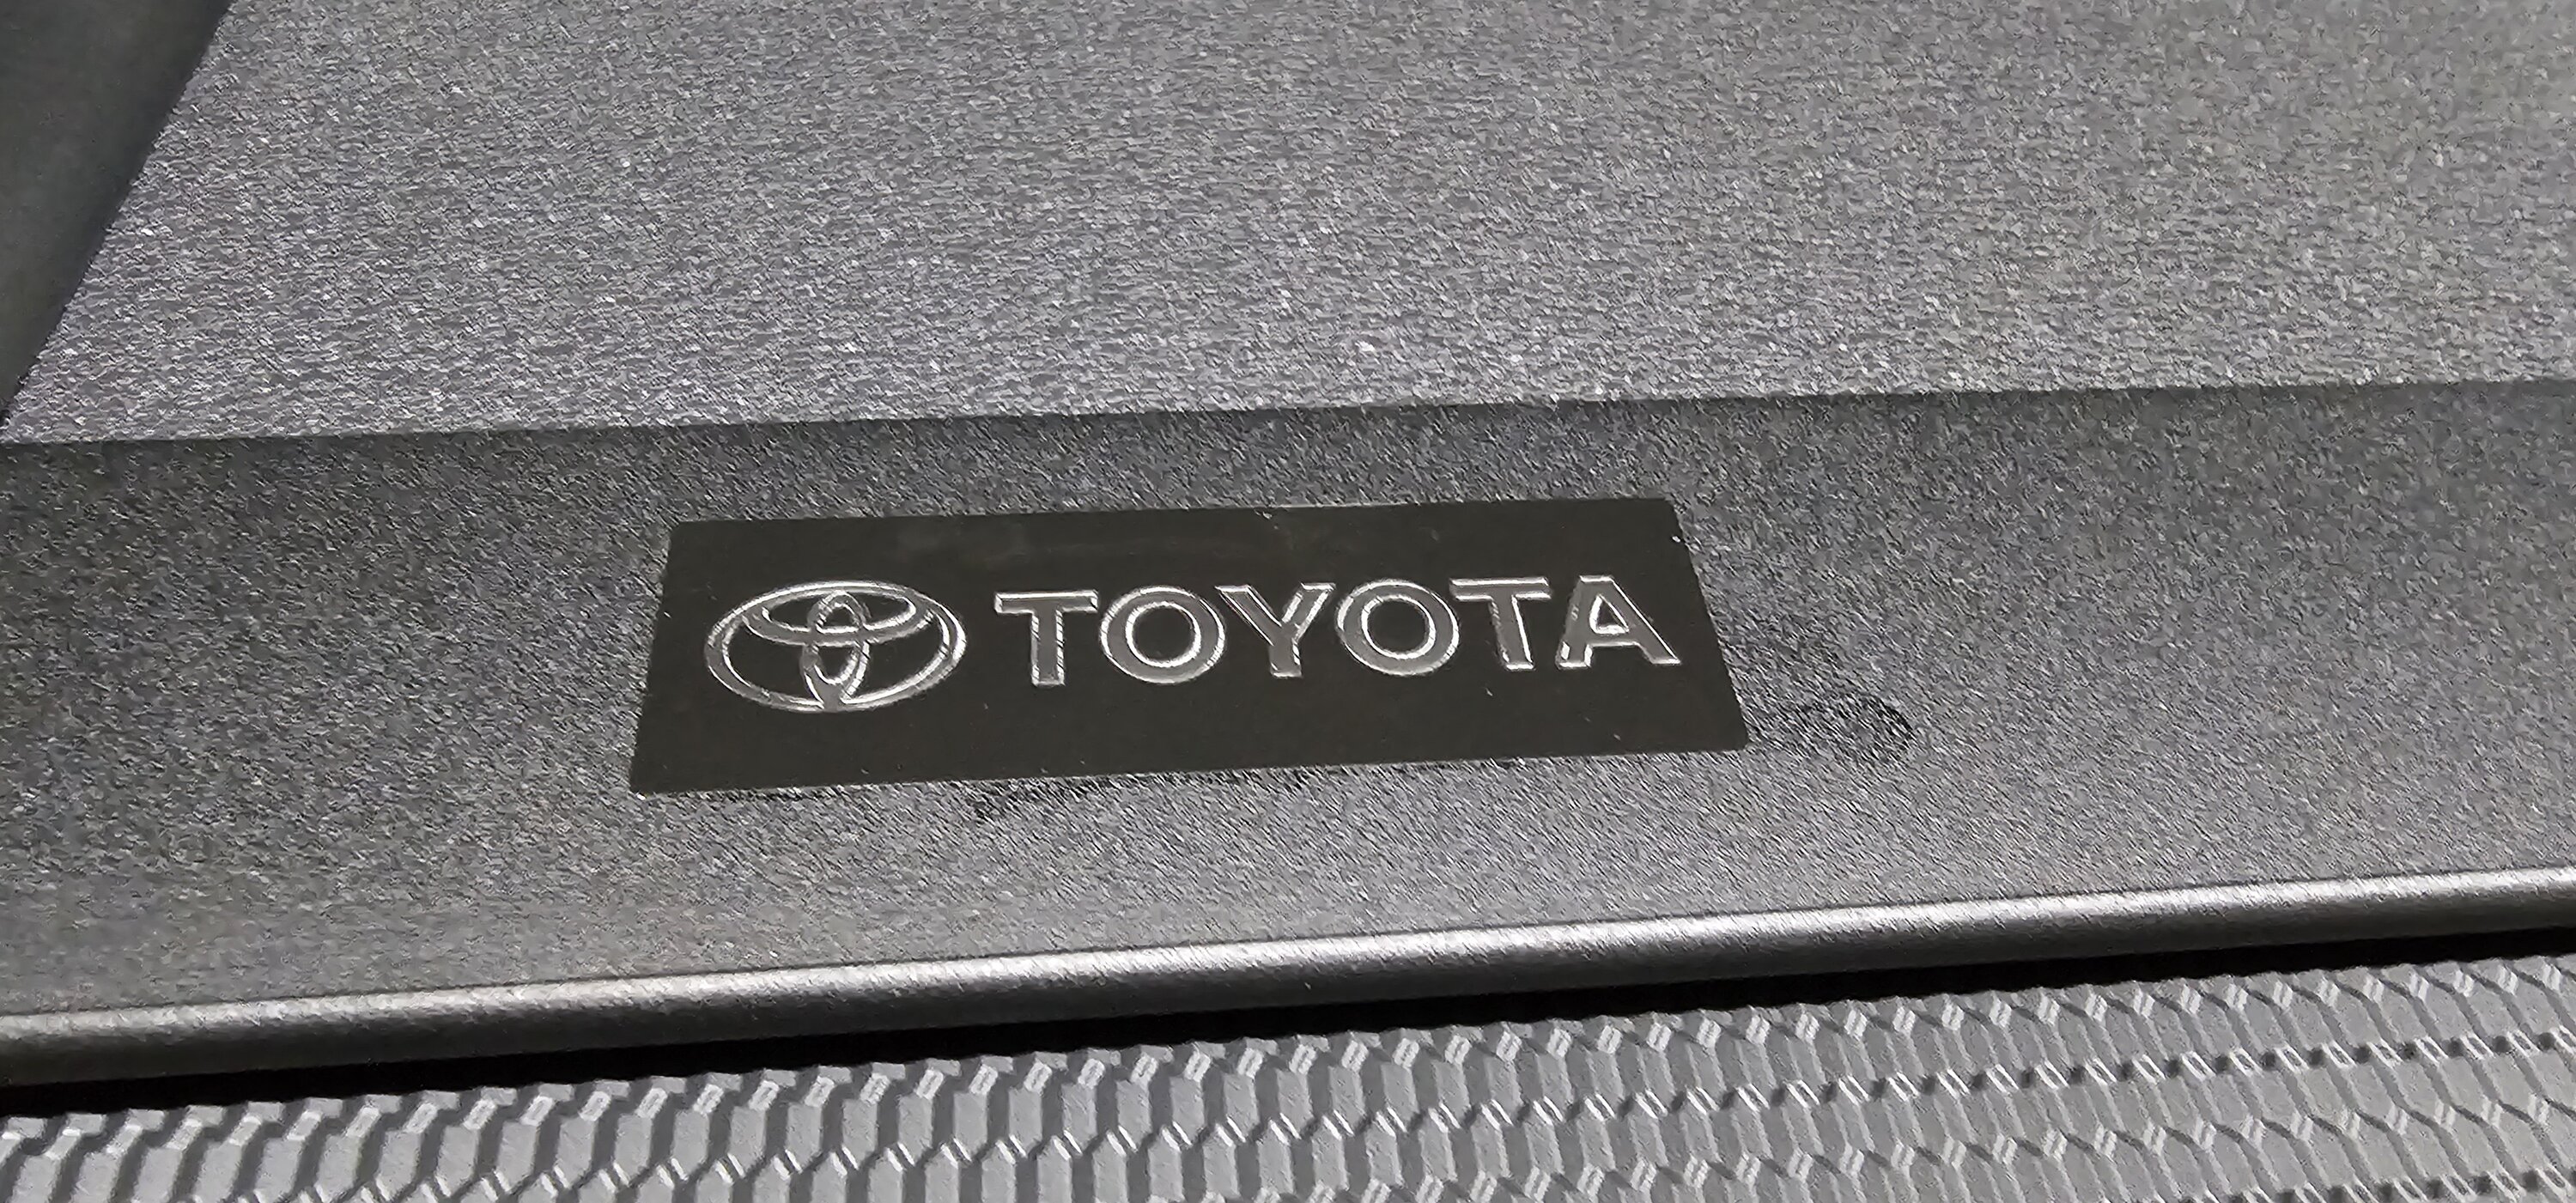 2024 Tacoma 6' Foot Bed Toyota OEM Tonneau Cover Installed (Part Number # PT954-35241) on 2024 Tacoma TRD Sport 20240509_141315